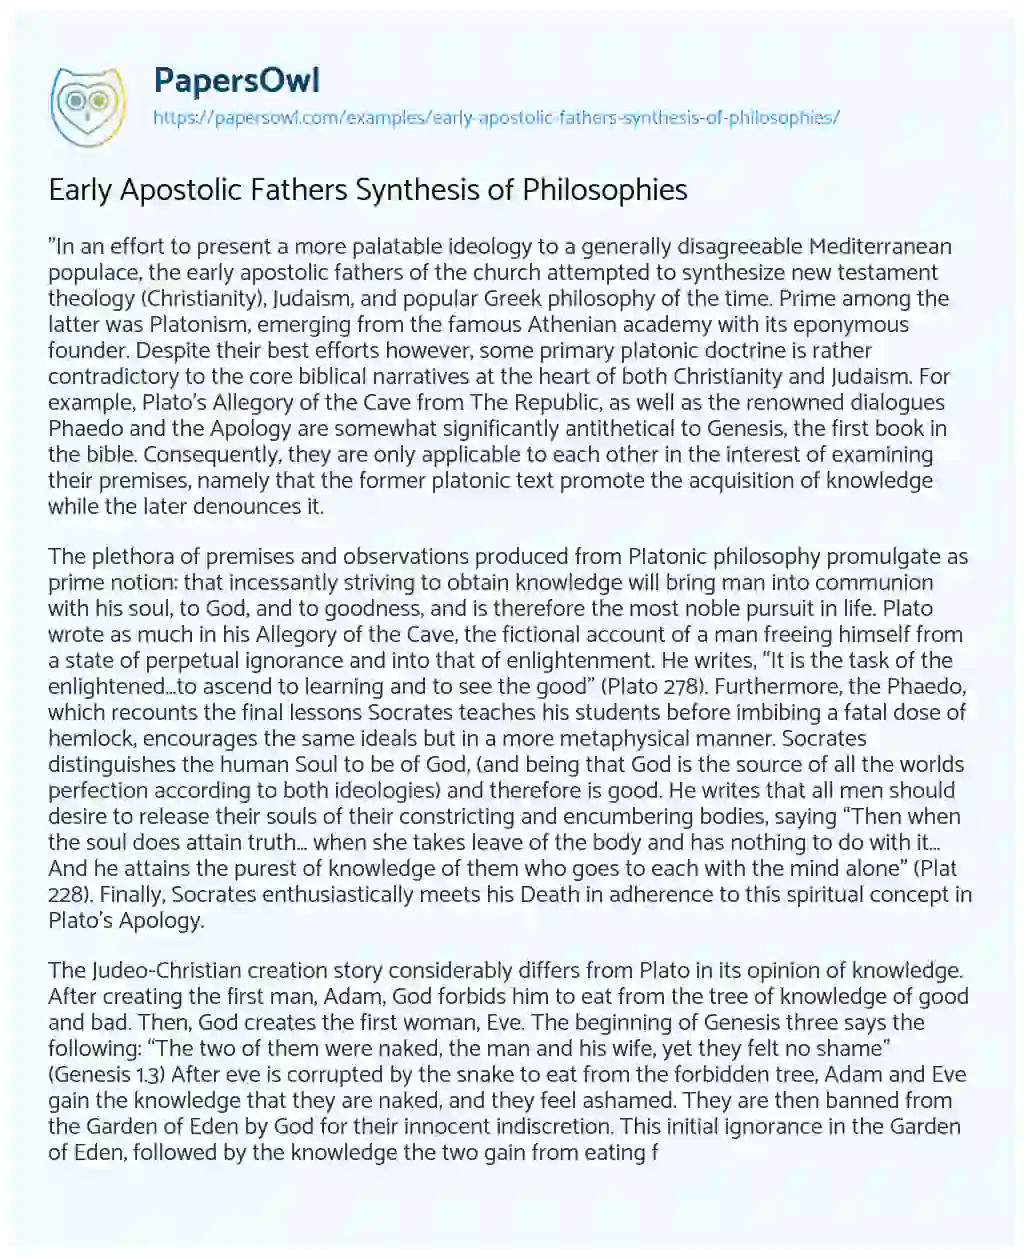 Essay on Early Apostolic Fathers Synthesis of Philosophies